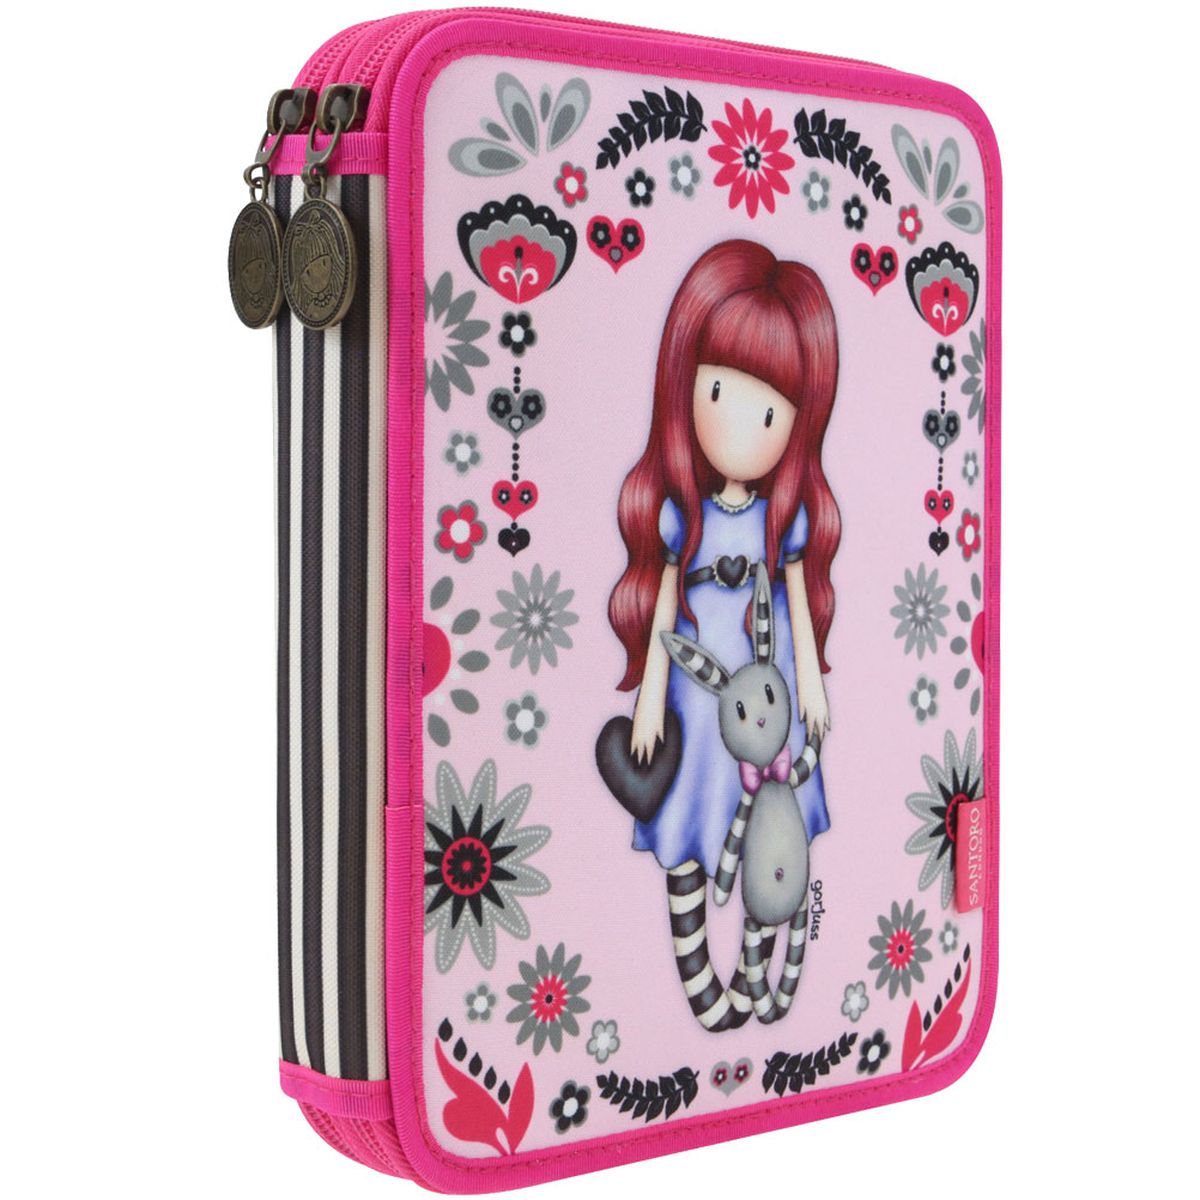 Gorjuss Fiesta Double Filled Pencil Case My Gift To You